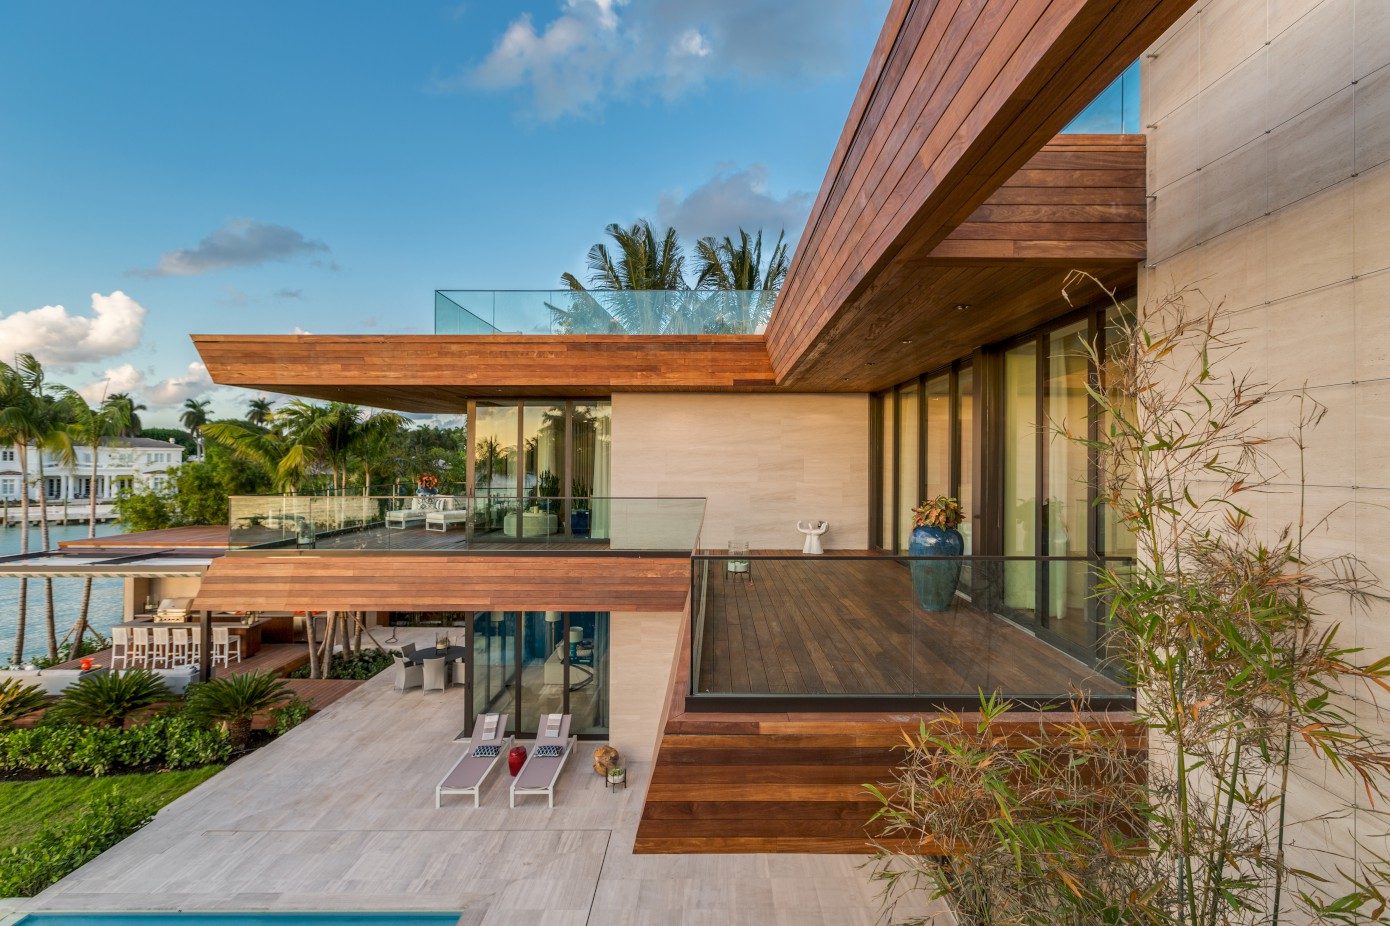 North Bay Road Residence by Choeff Levy Fischman